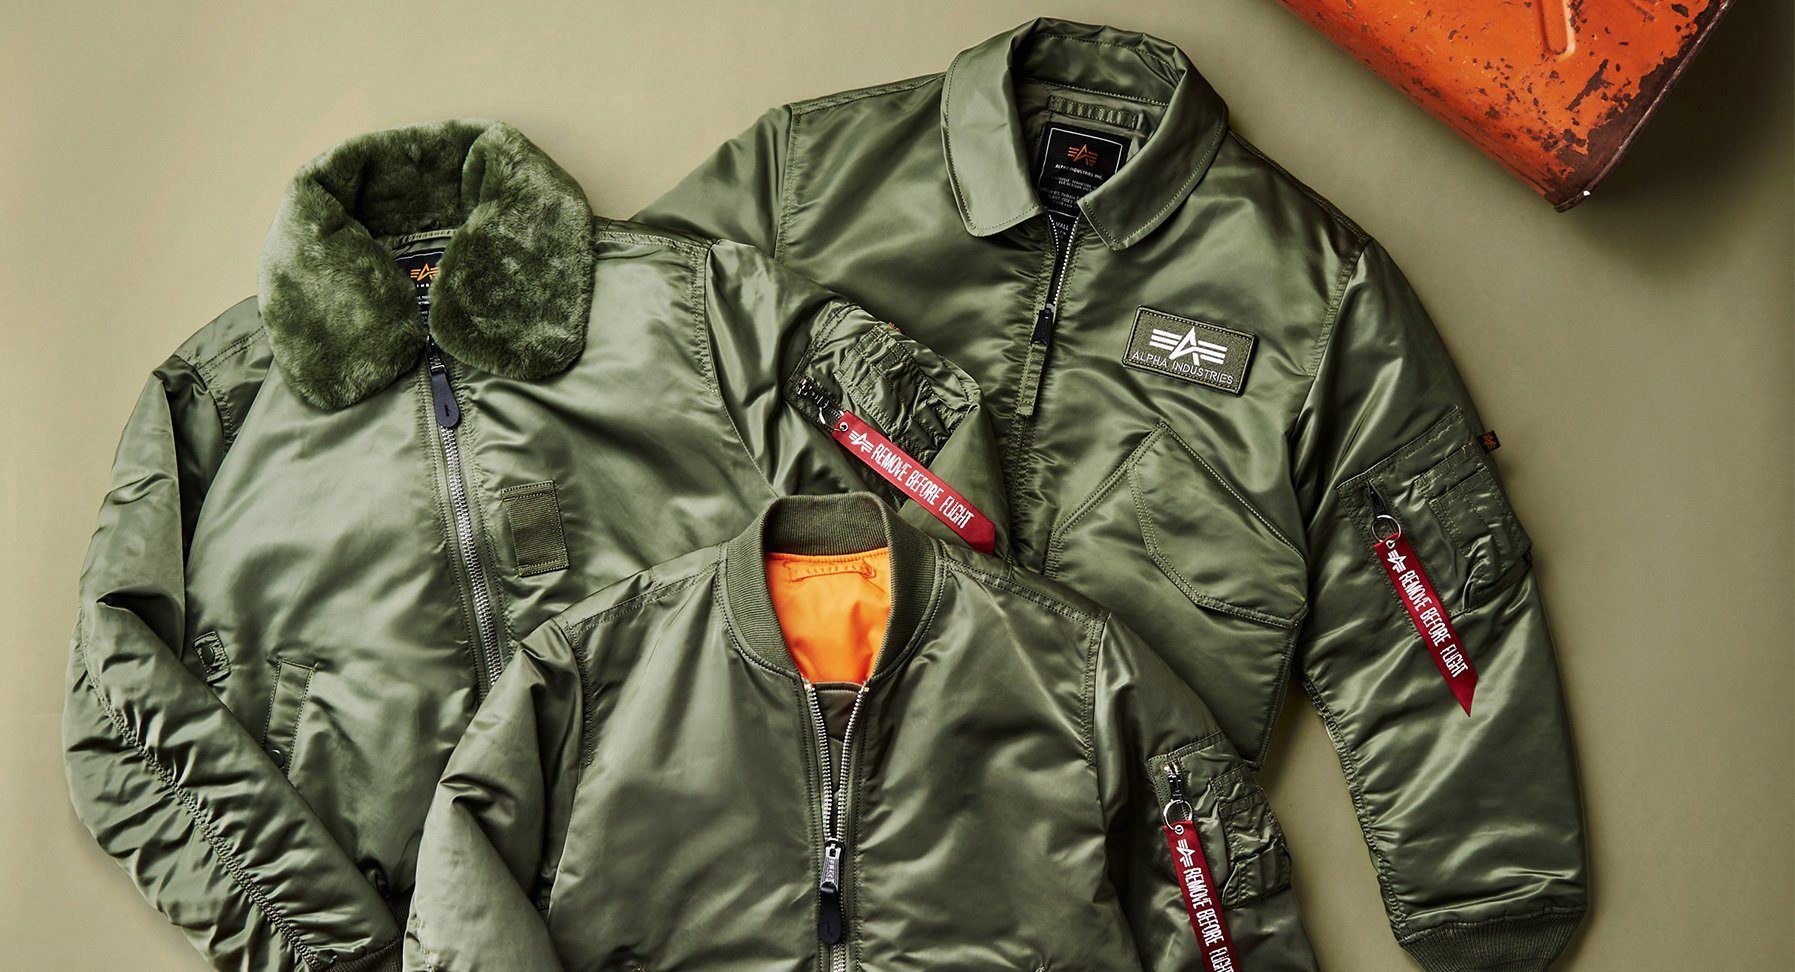 – CORE Alpha Industries STYLES